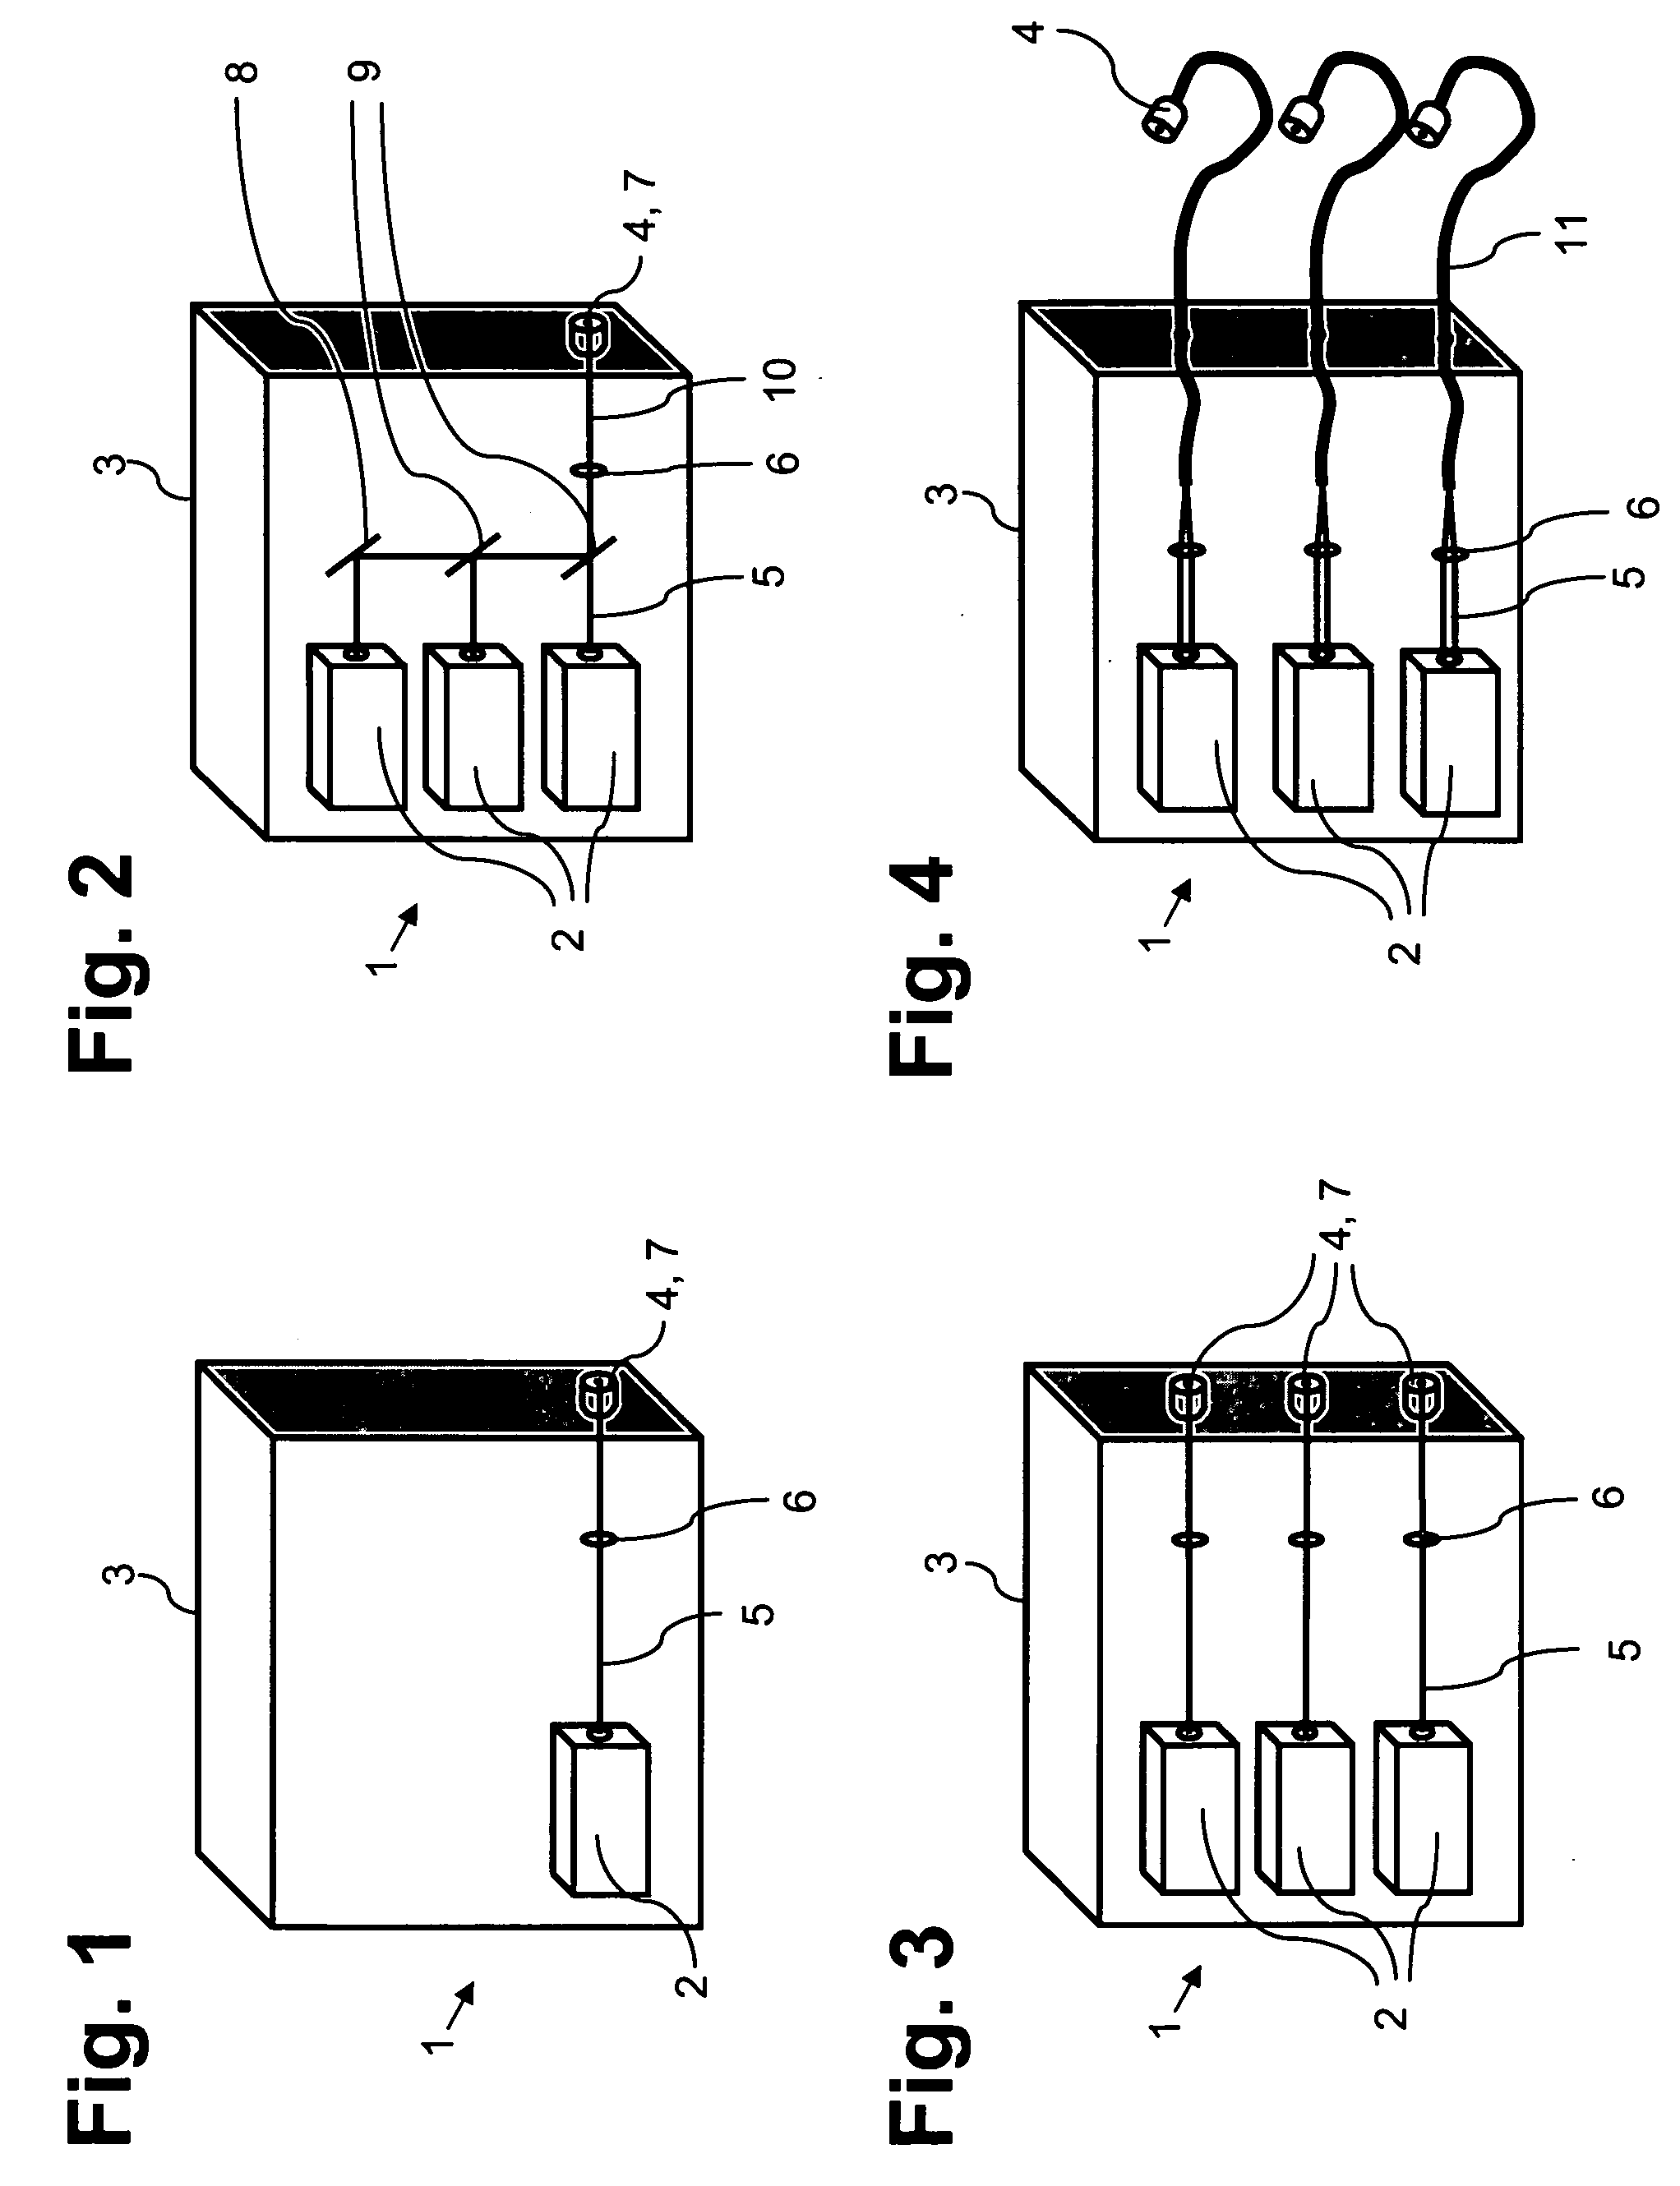 Device for generating a laser light beam